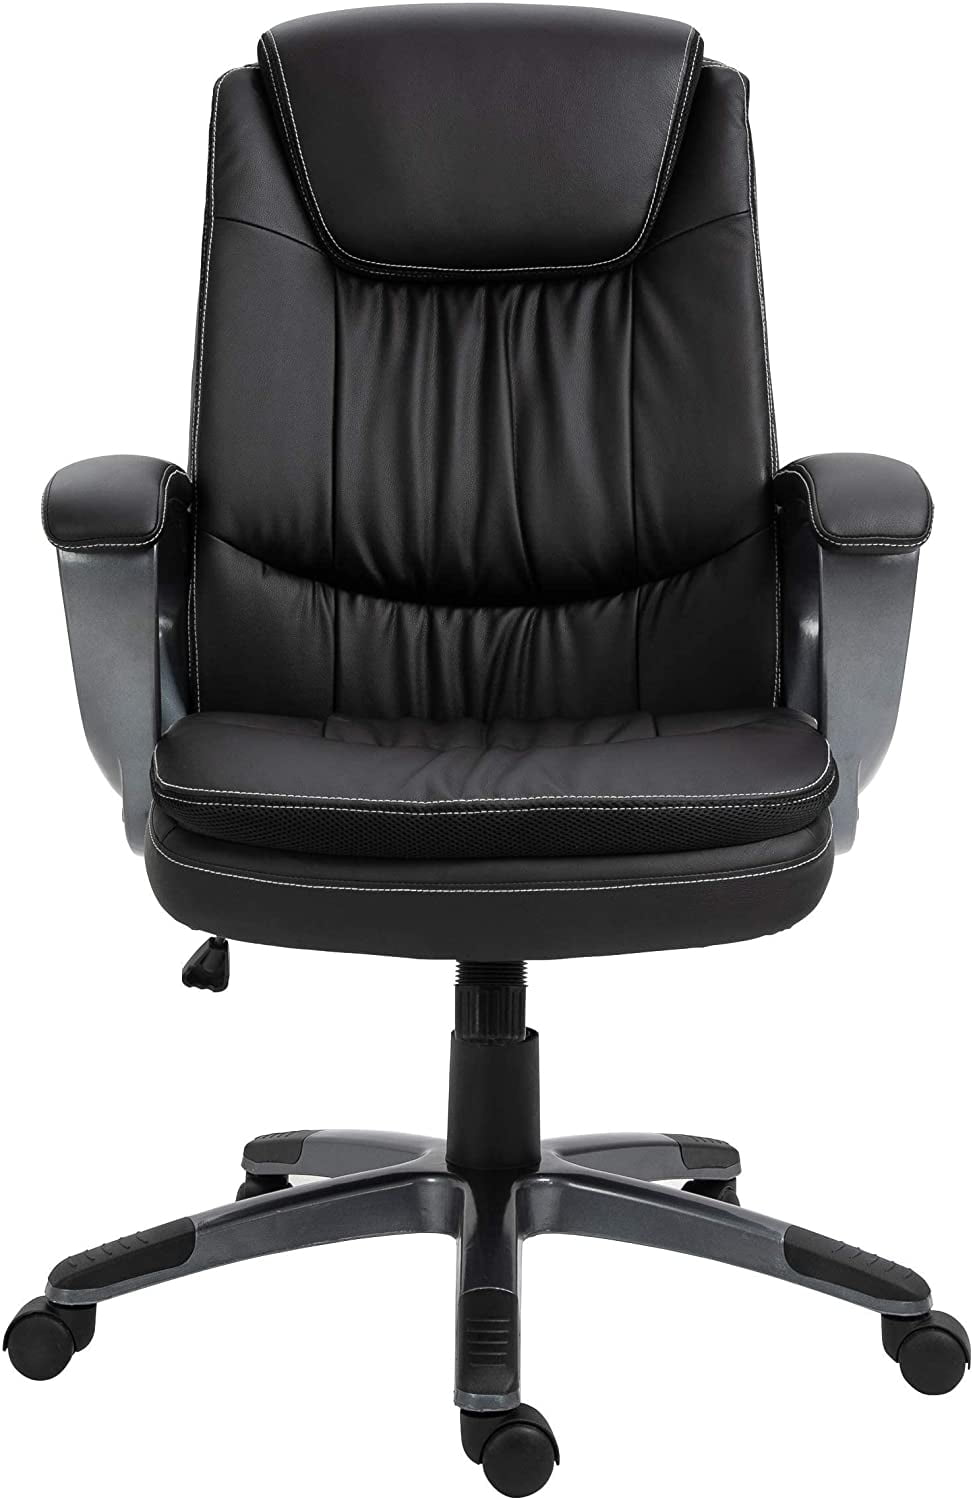 Thick Padded Seat and Backrest HALTER Executive Office Chair PU Leather Desk Chair with Smooth Glide Caster Wheels 1 Pack Black Ergonomic Design High Back Reclining Comfortable Desk Chair